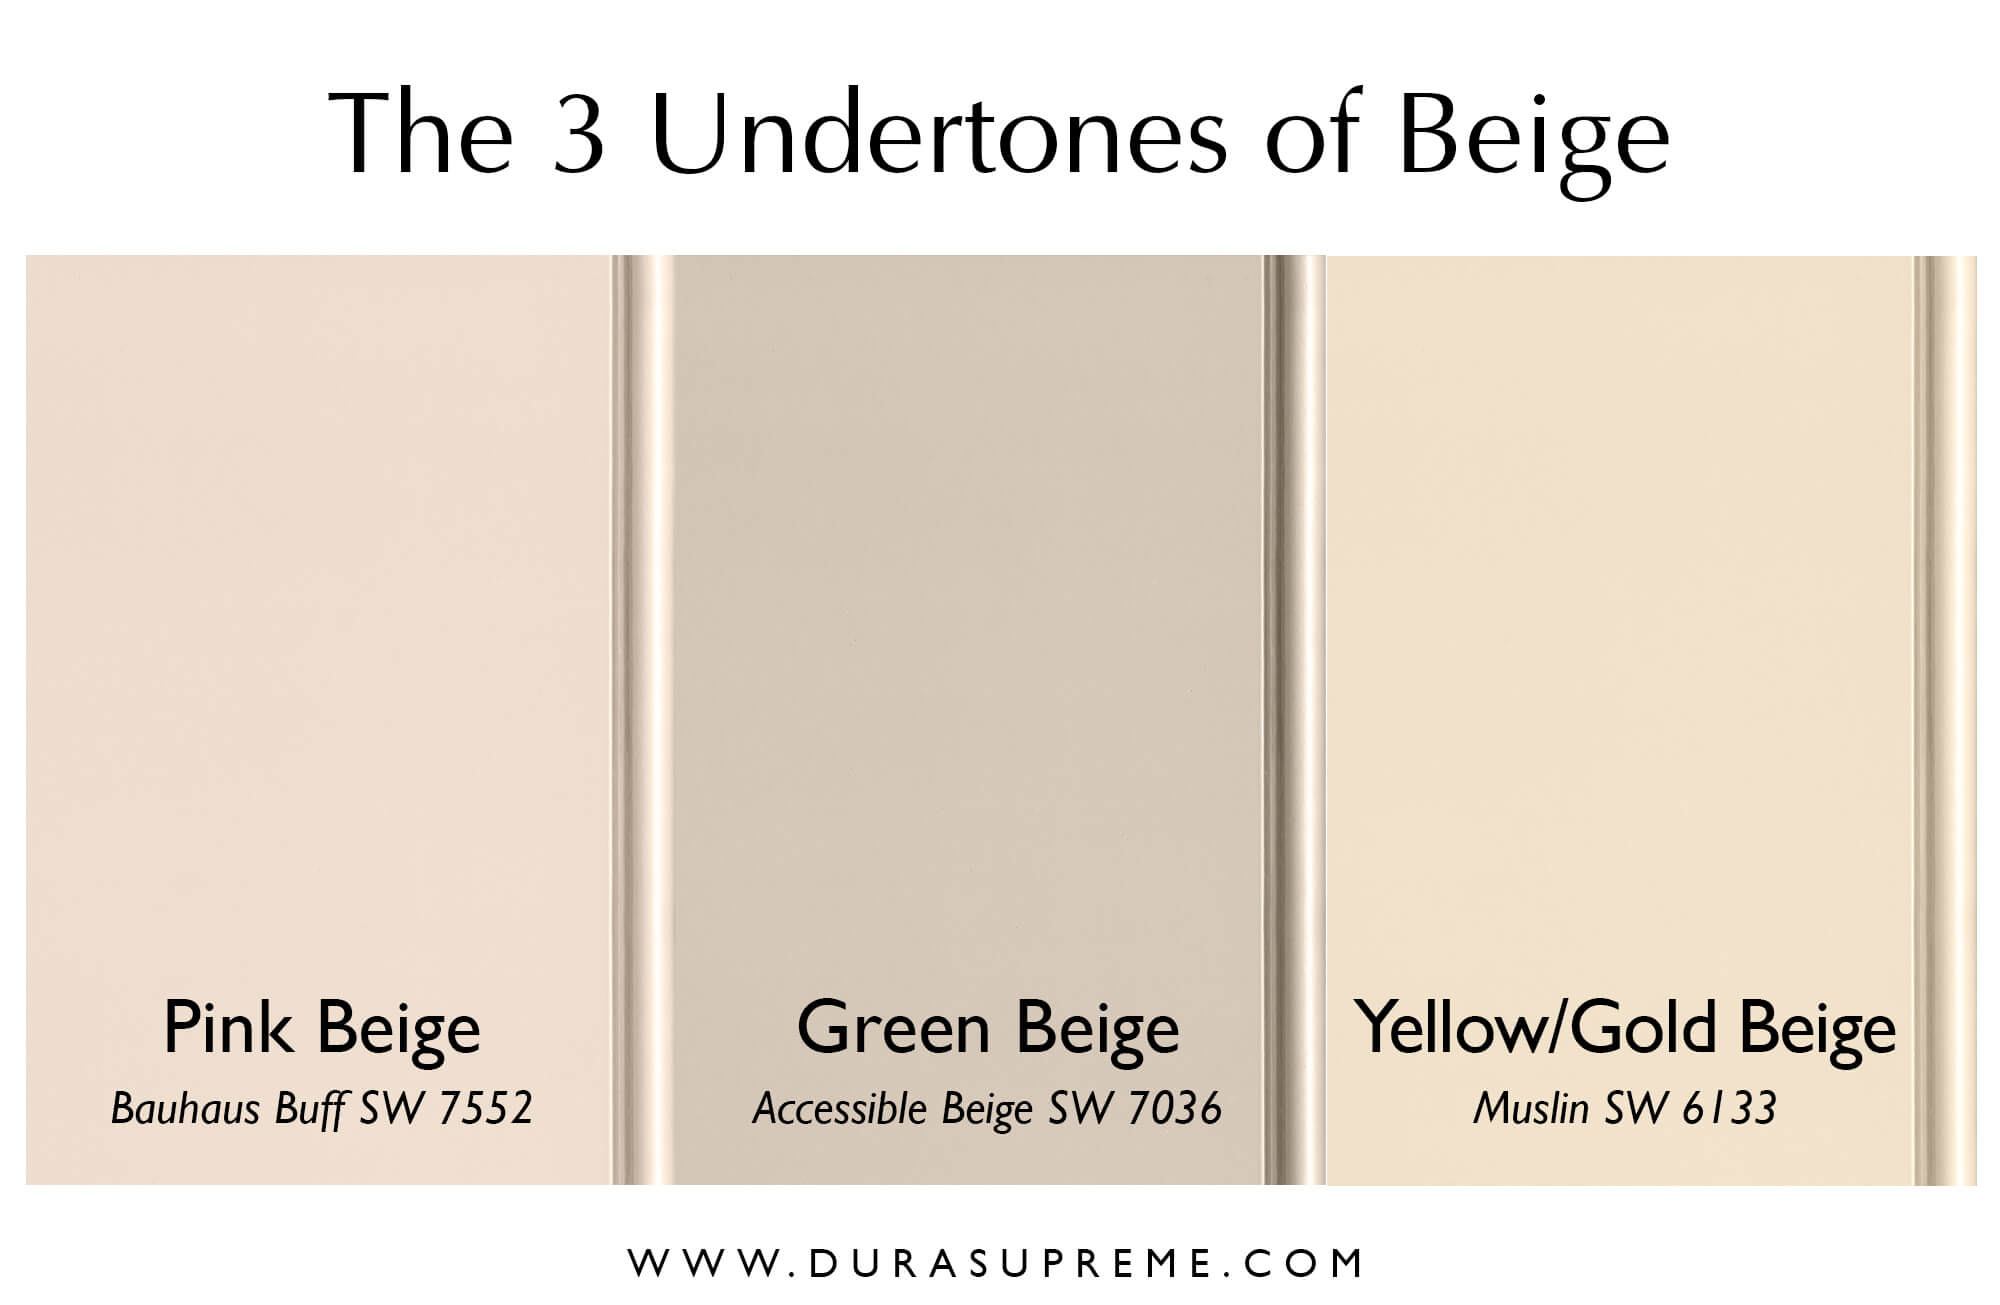 The 3 Undertones of the color Beige, pink-beige, green-beige, and yellow/gold beige. Featuring Bauhaus Bluff SW7552, Accessible Beige SW7036, and Muslin SW6133 by Sherwin-Williams.